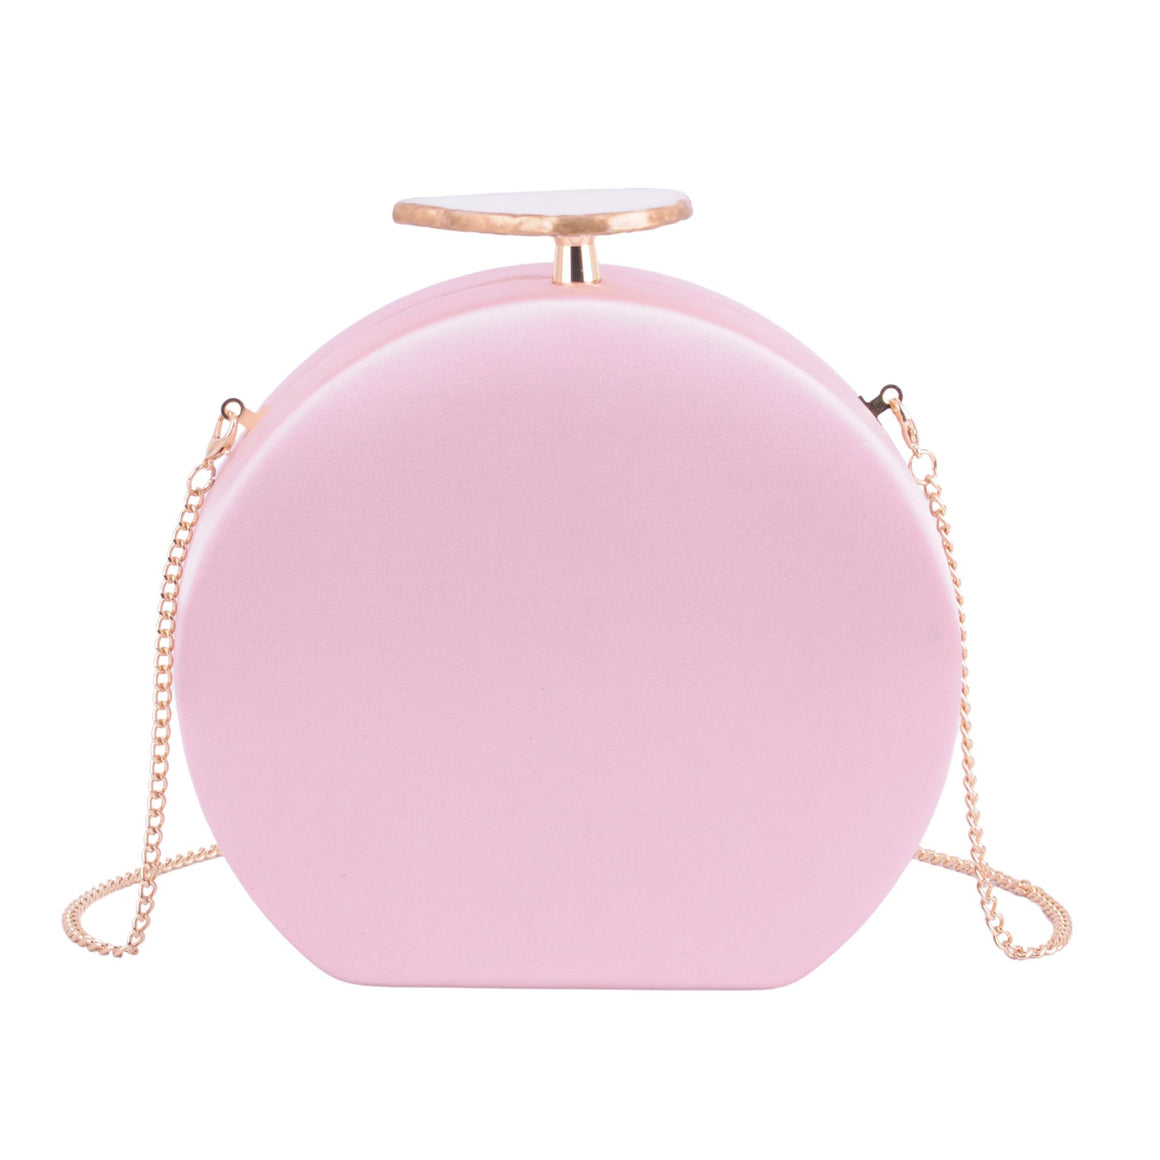 1610 - Timeless Elegance: Silk Round Clutch with Raw Cut Stone Top and Chain Crossbody Stra